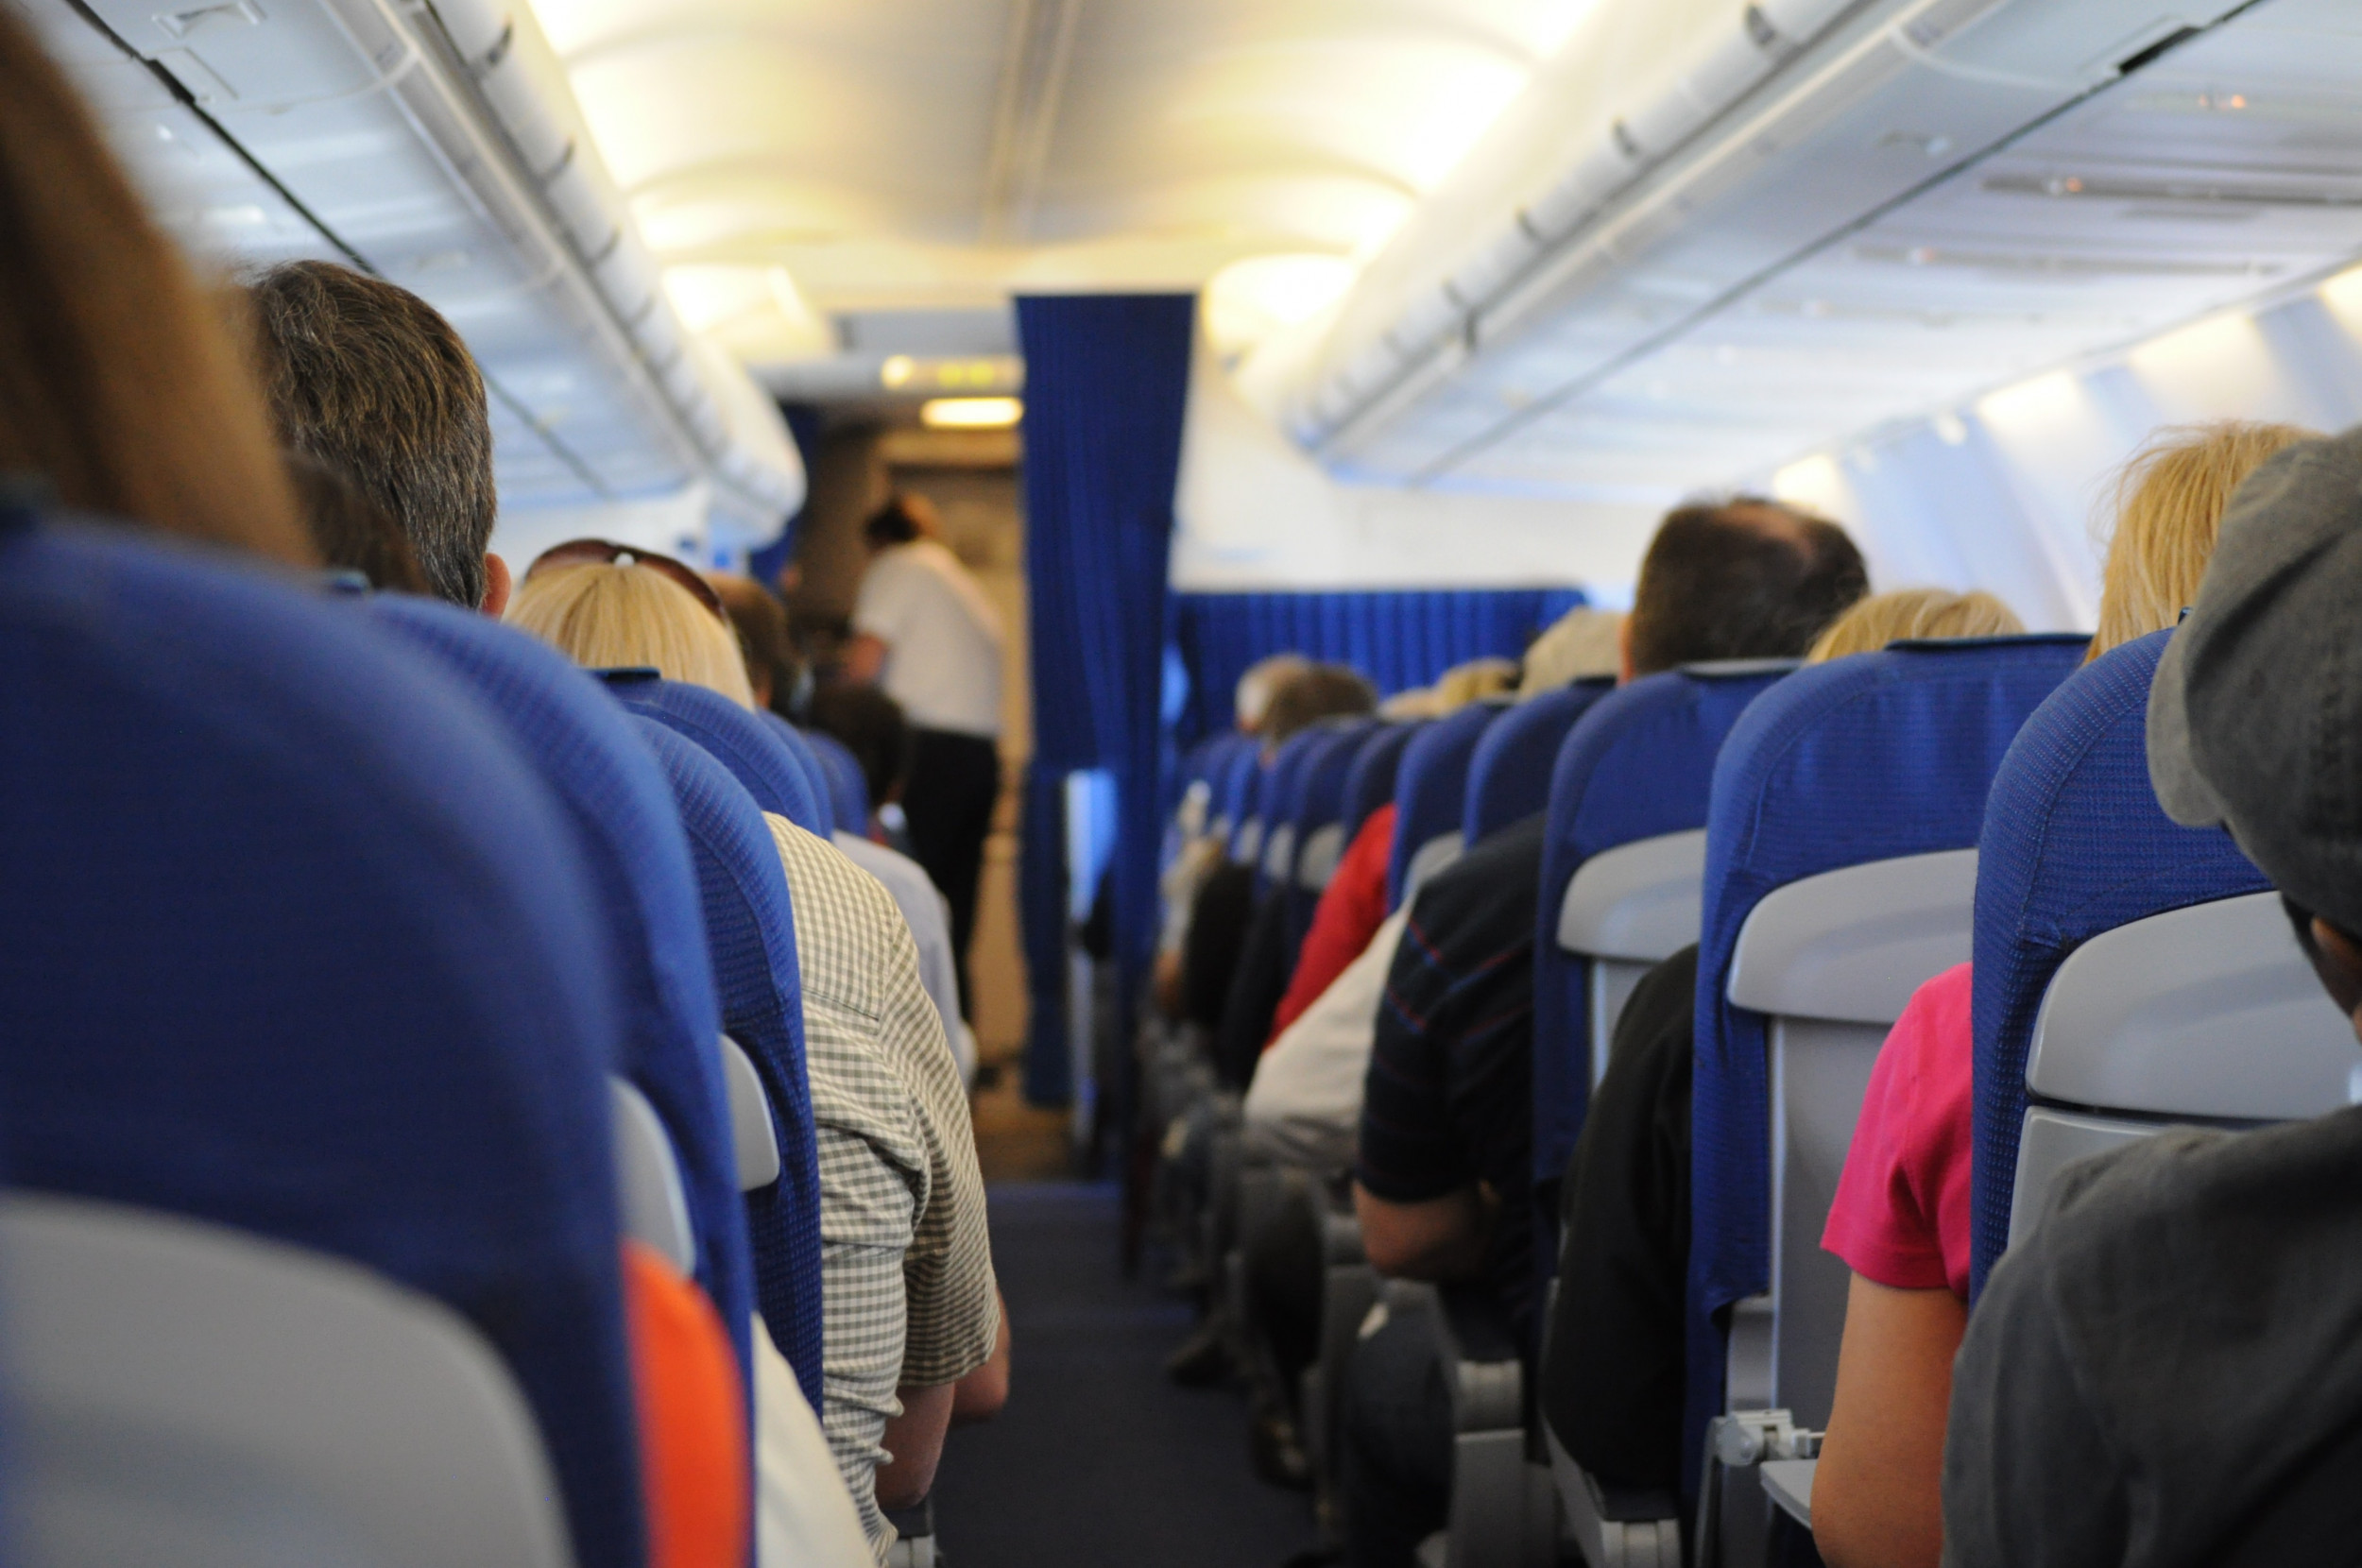 Passenger Applauded for Refusing to Swap Seats So Family Could Sit Together